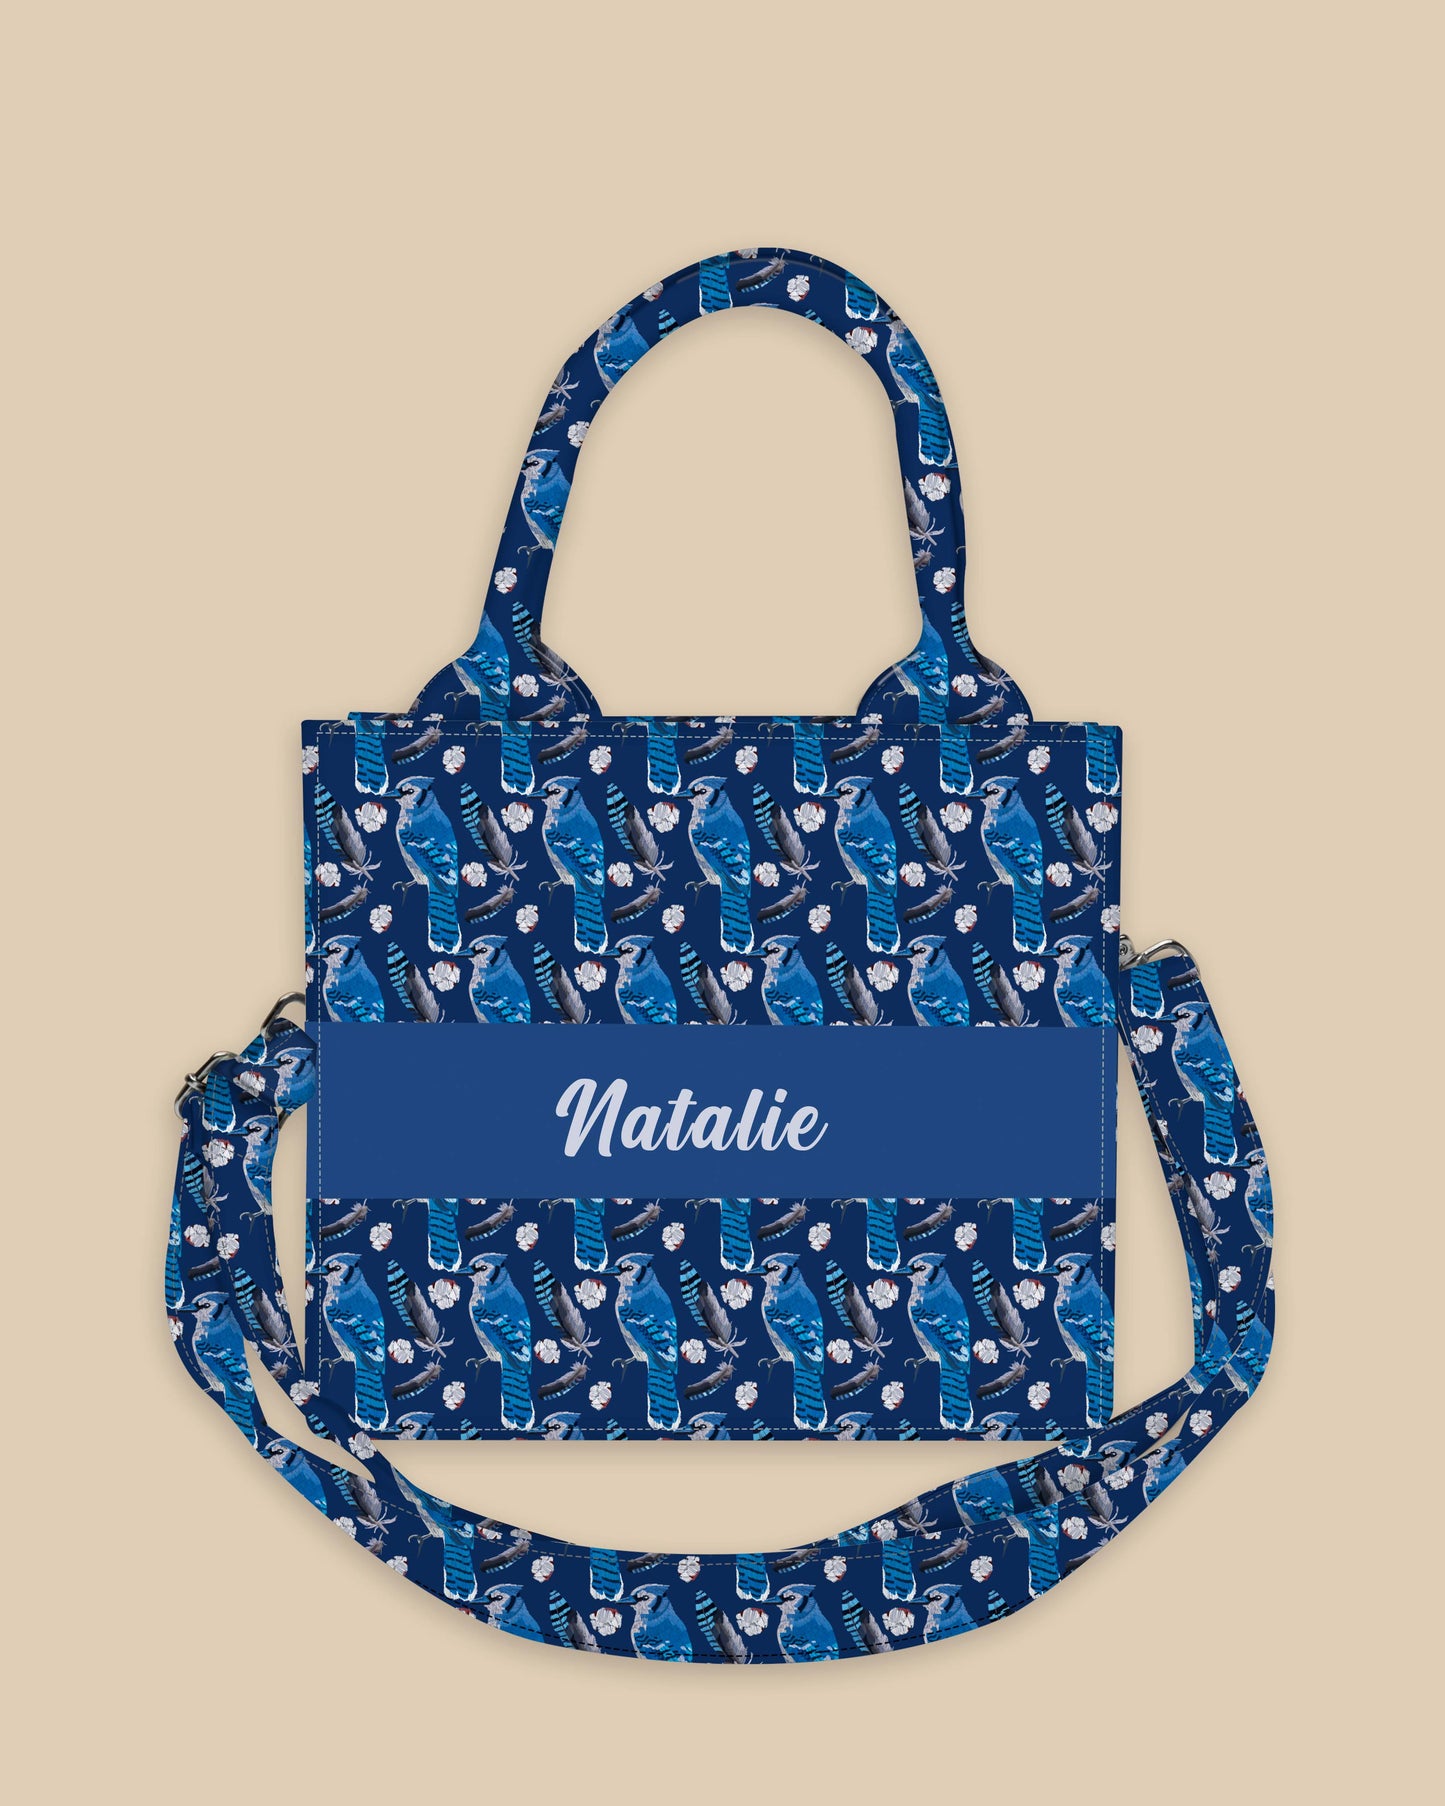 Customized Small Tote Bag Designed With Blue Jay Birds And Feather